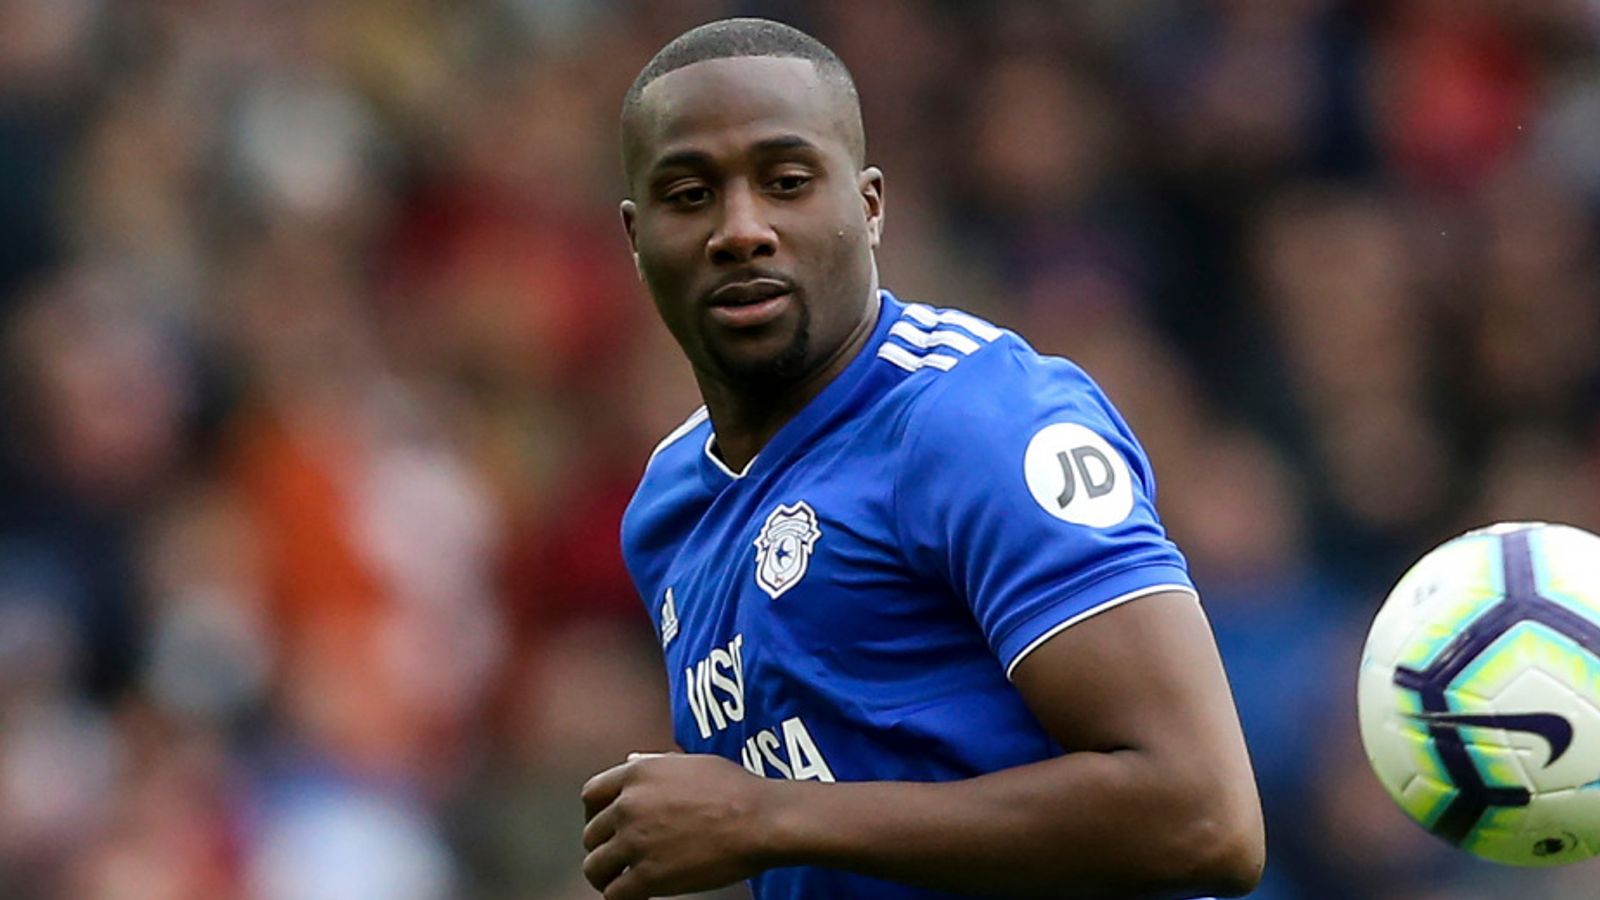 Cardiff City footballer recovering from malaria